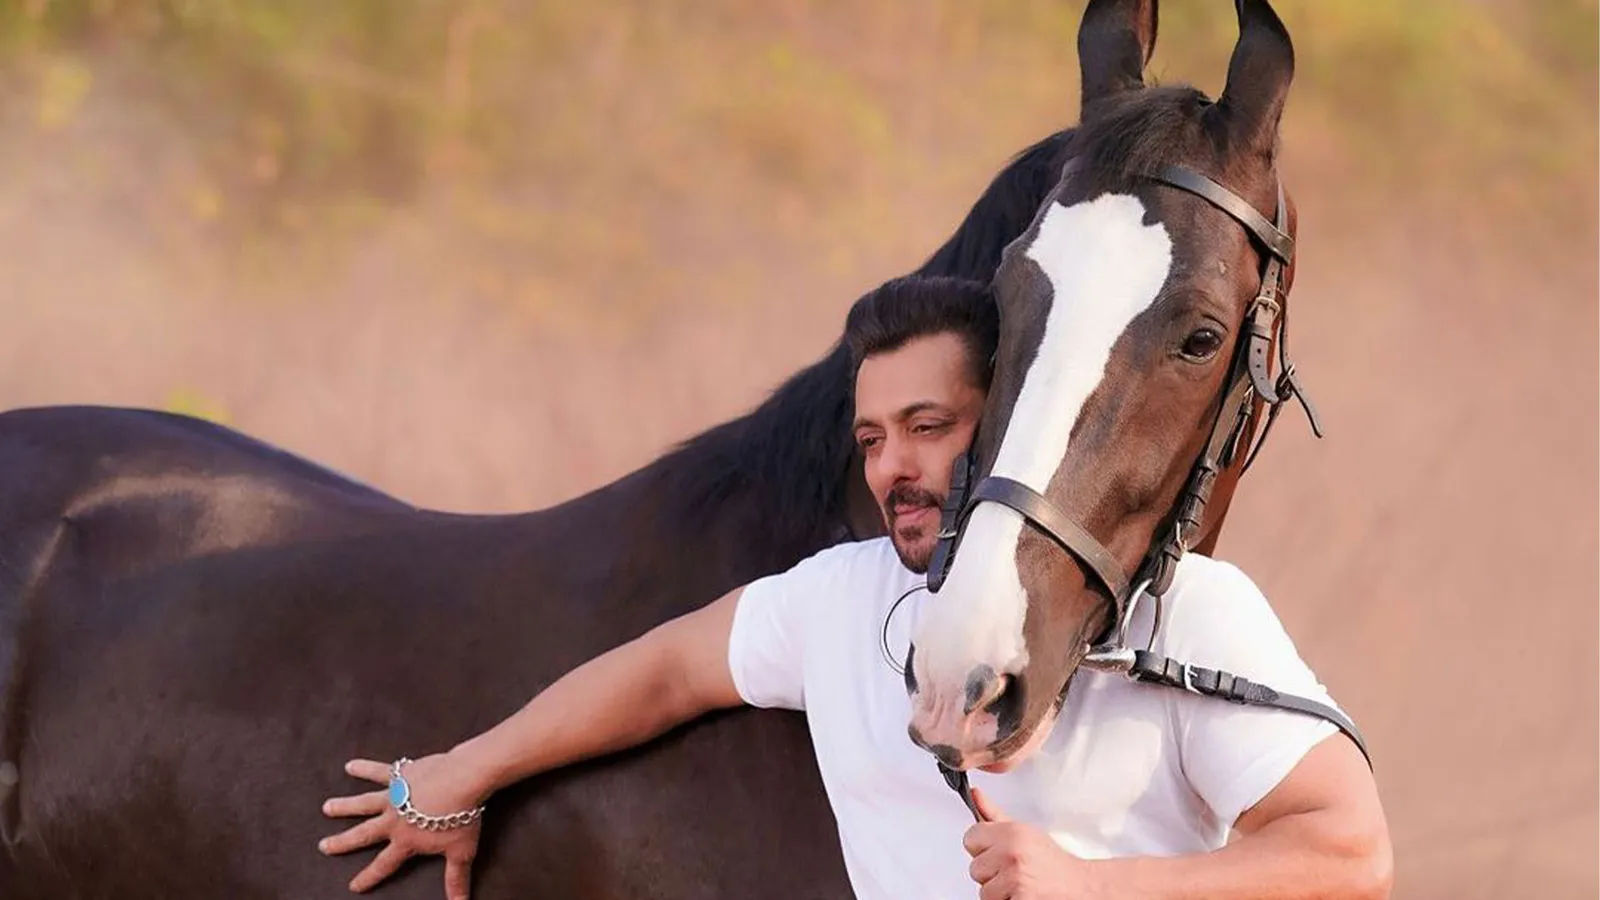 Luxury homes to horses: Here are the most expensive things owned by Salman Khan